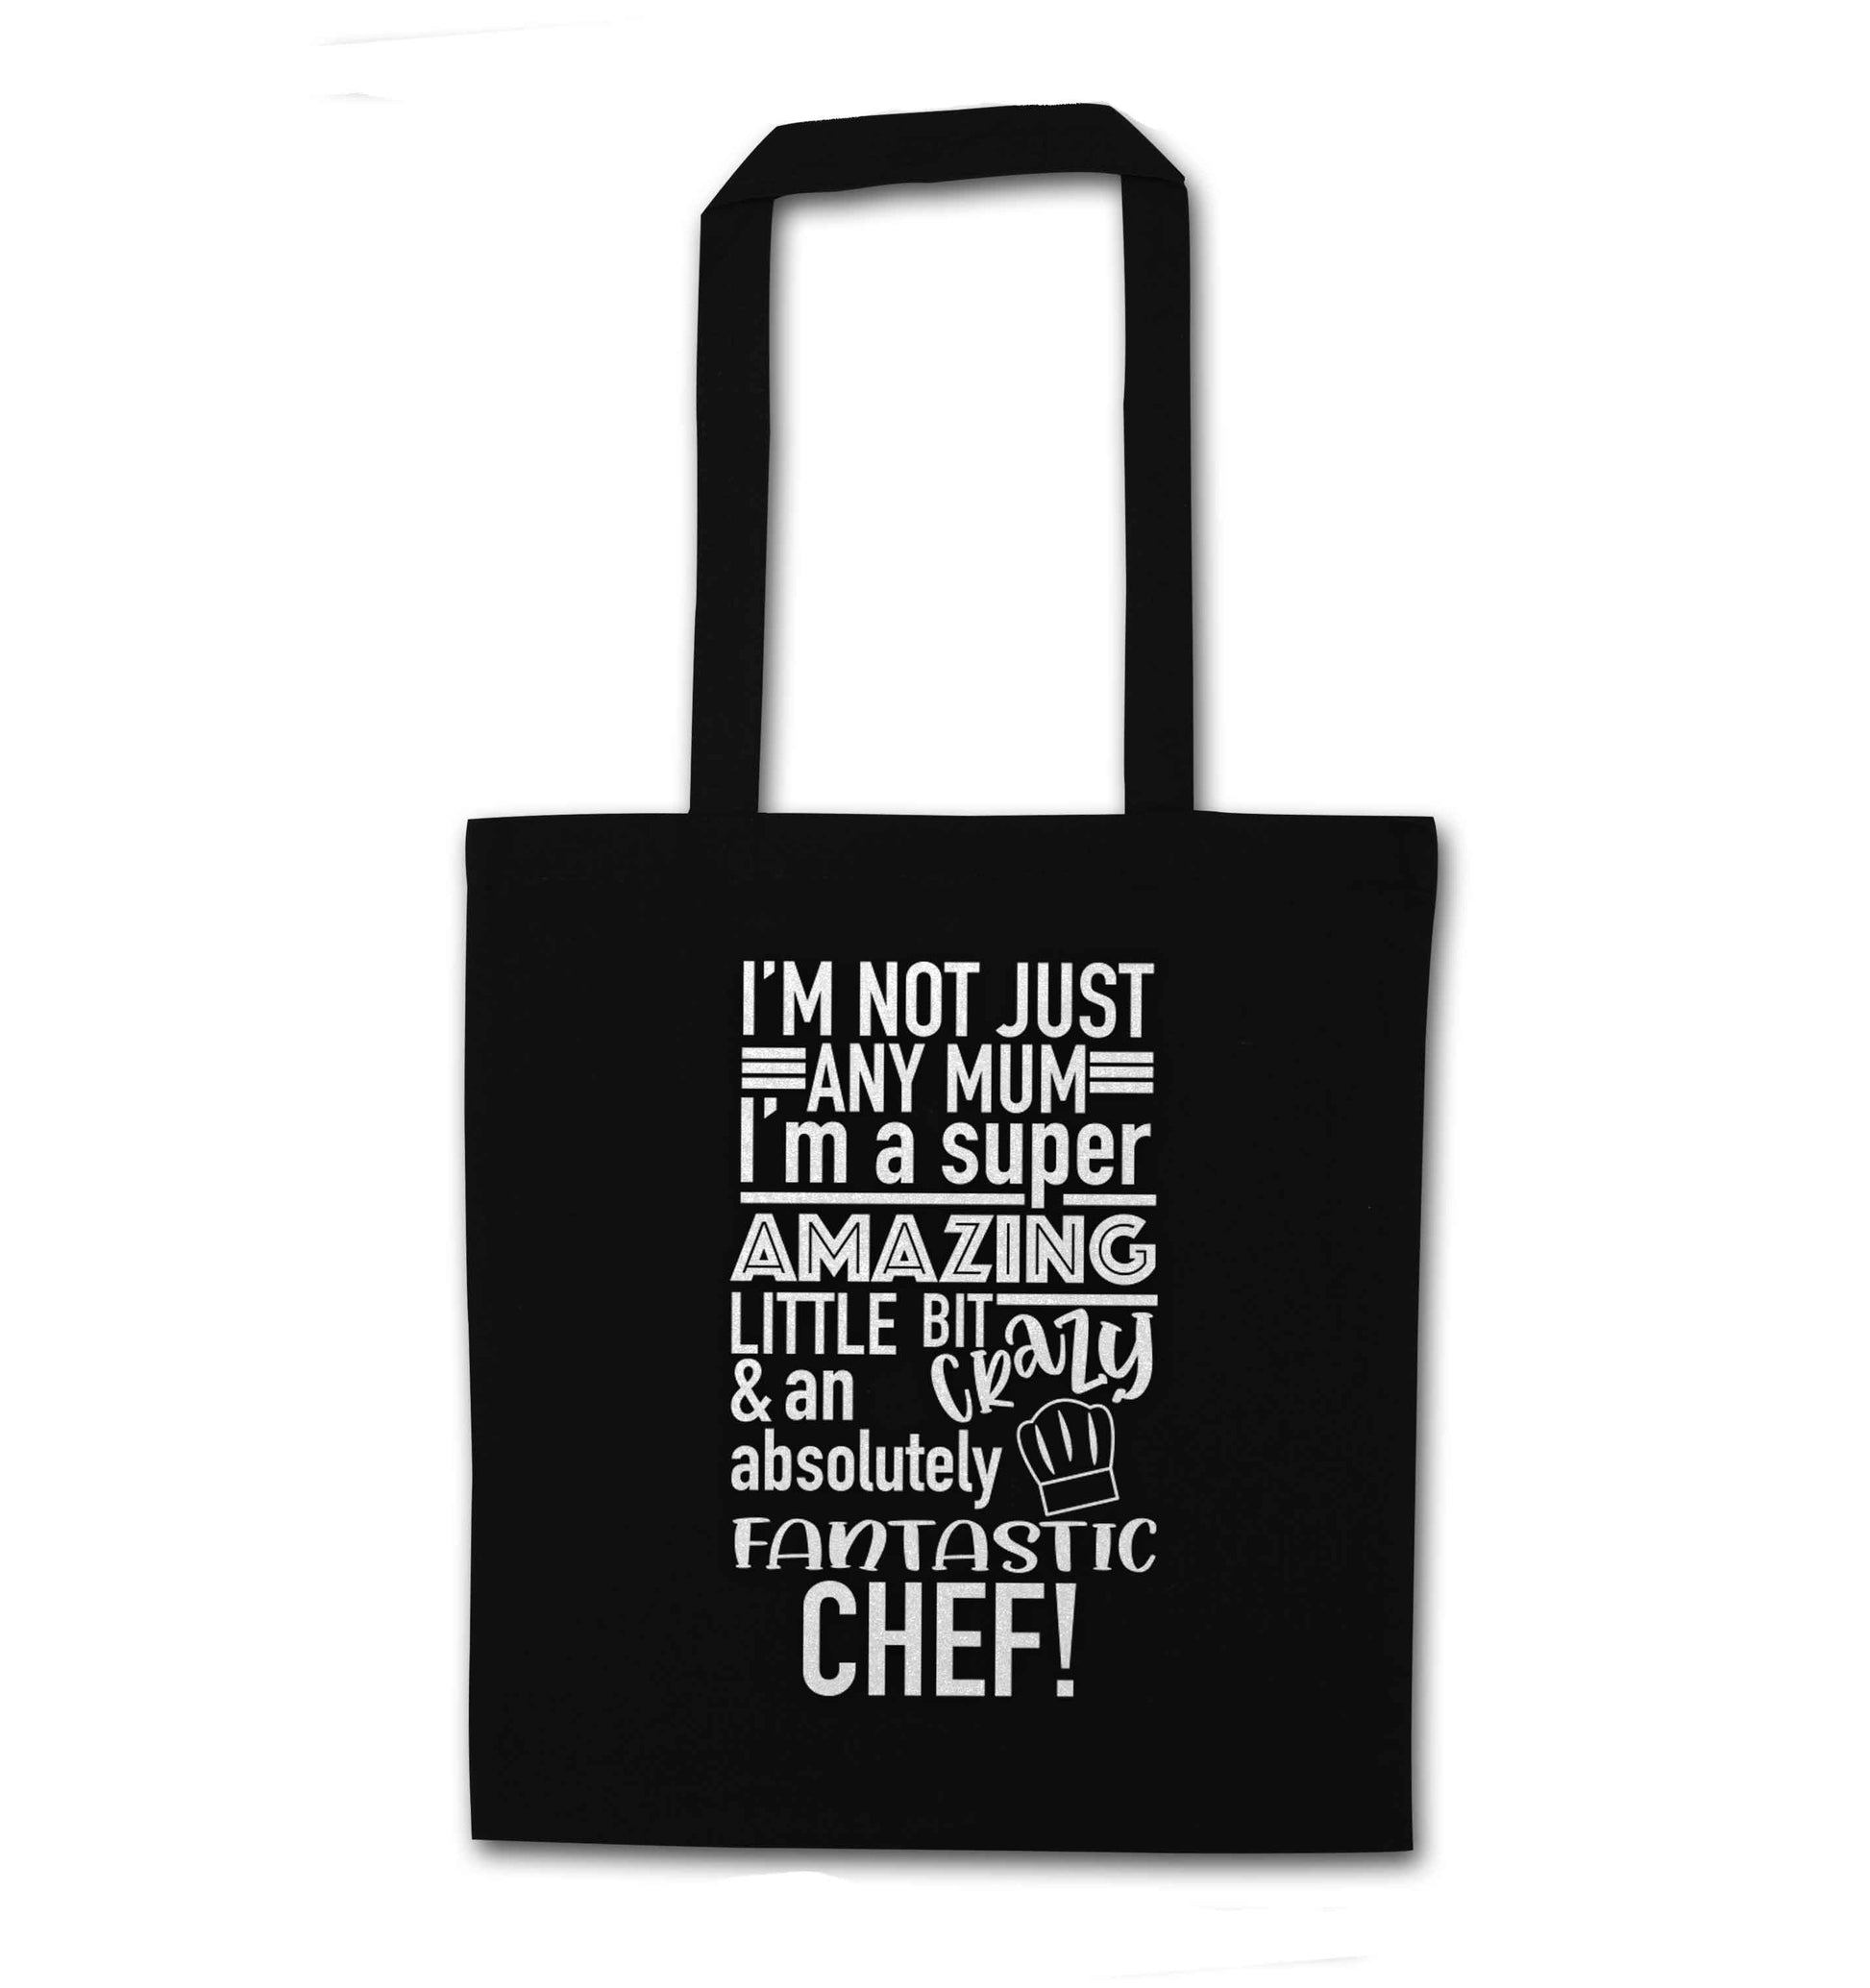 I'm not just any mum I'm a super amazing little bit crazy and an absolutely fantastic chef! black tote bag